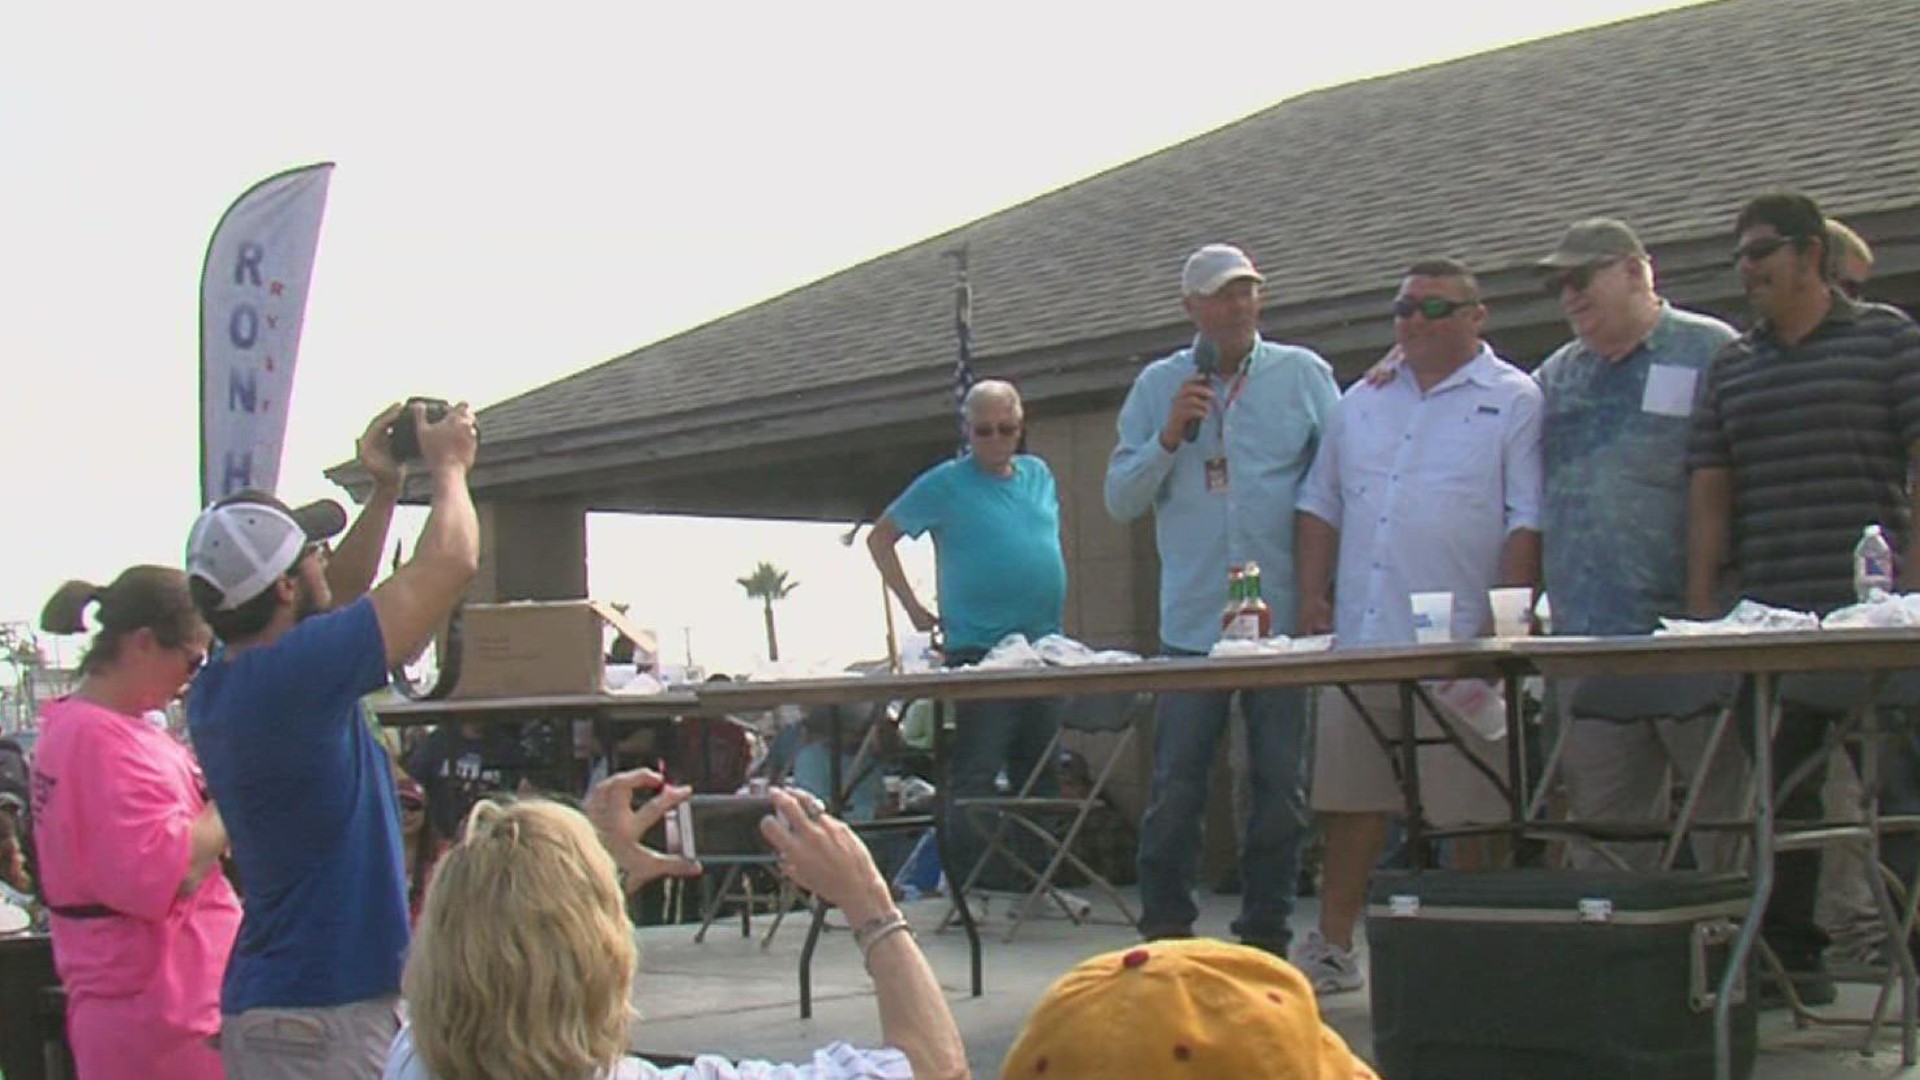 Having eaten 91 oysters in 5 minutes, Eric Mendez was the winner of Saturday's contest.